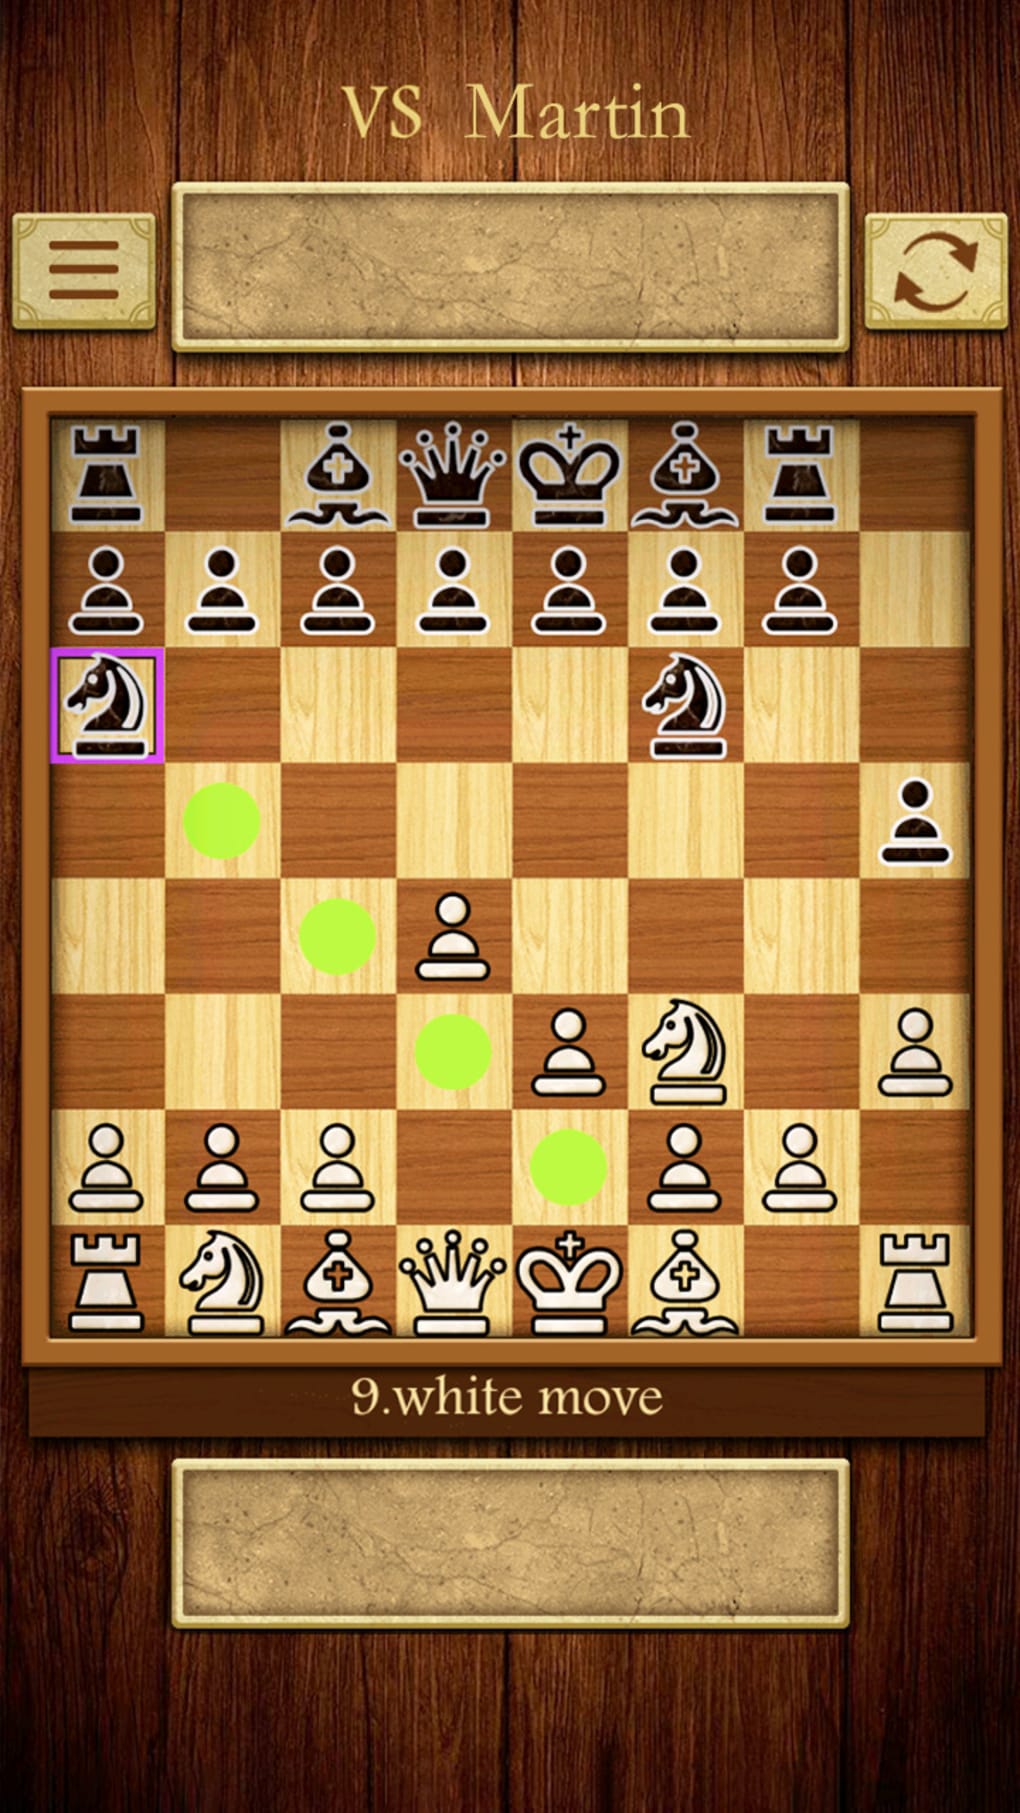 Download Chess Free 2019 - Master Chess- Play Chess Offline APK